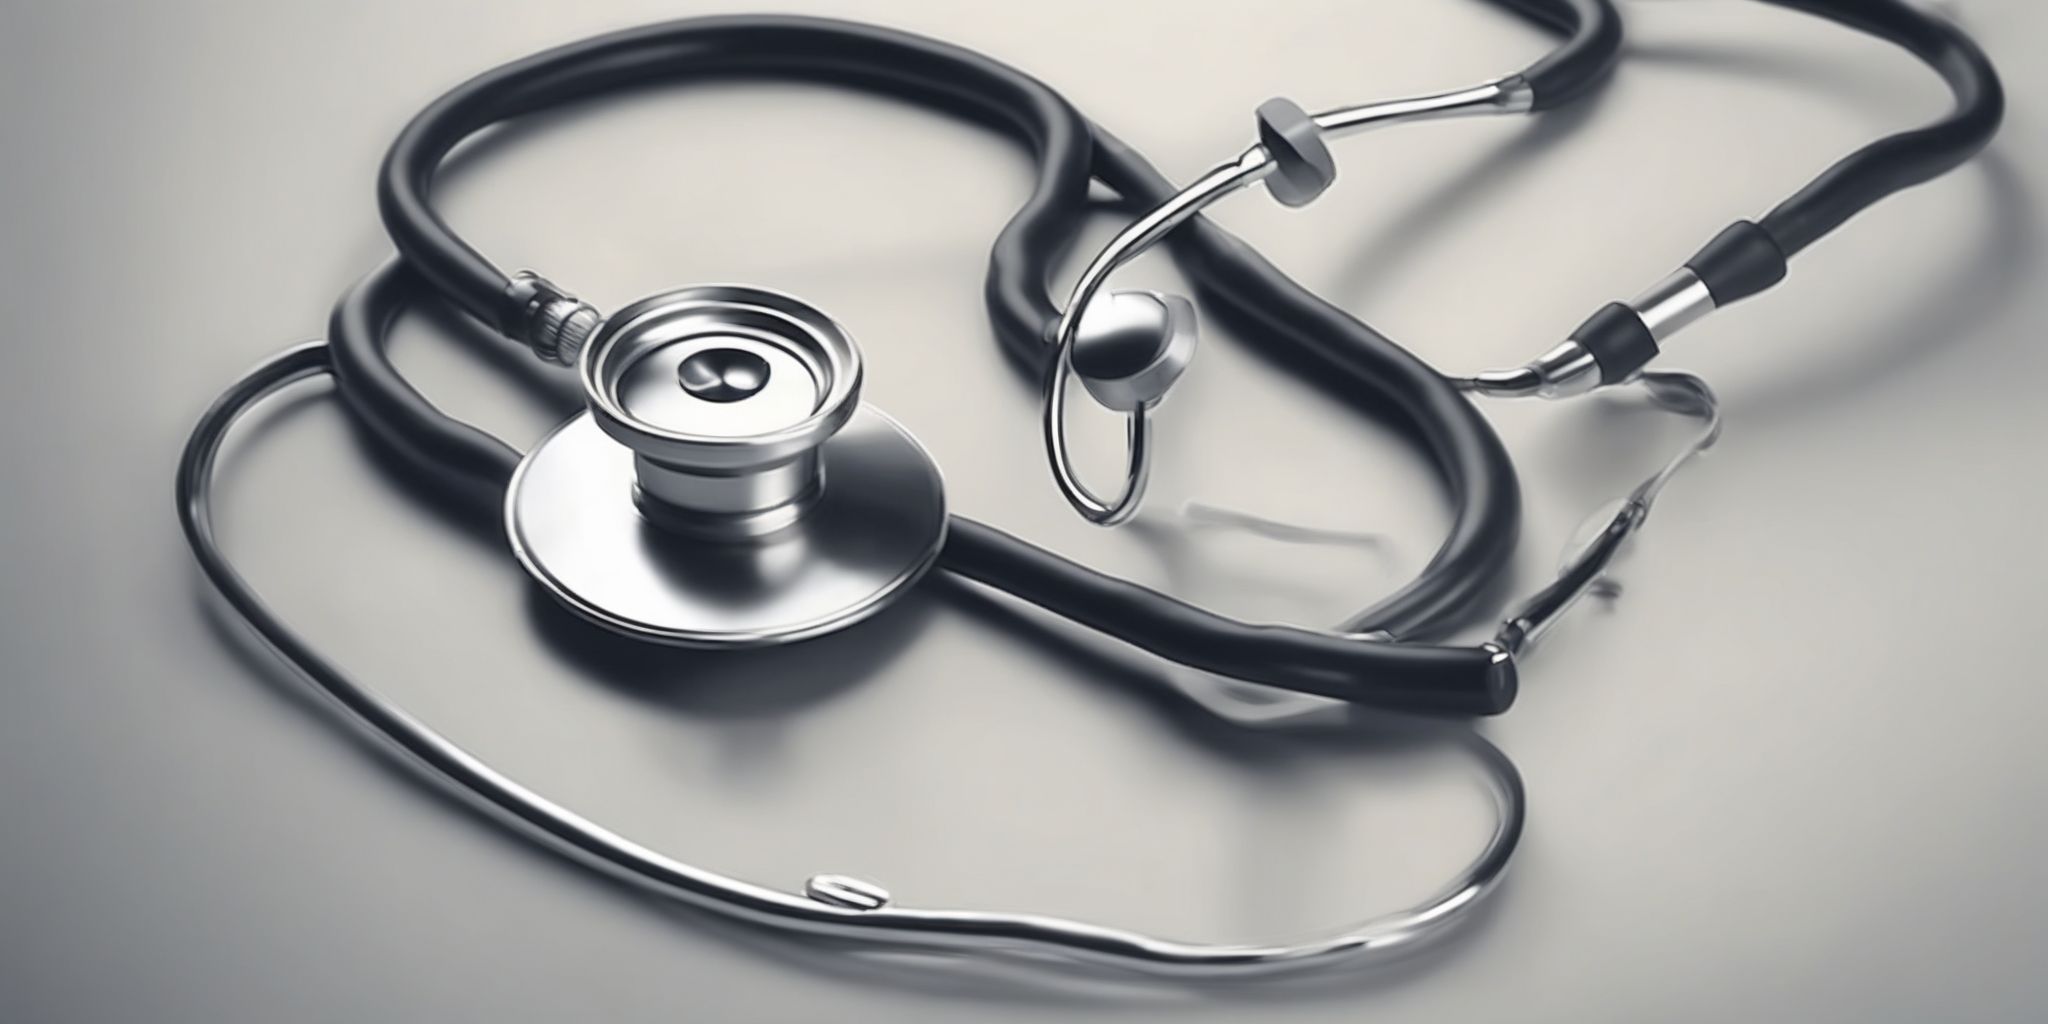 Stethoscope  in realistic, photographic style